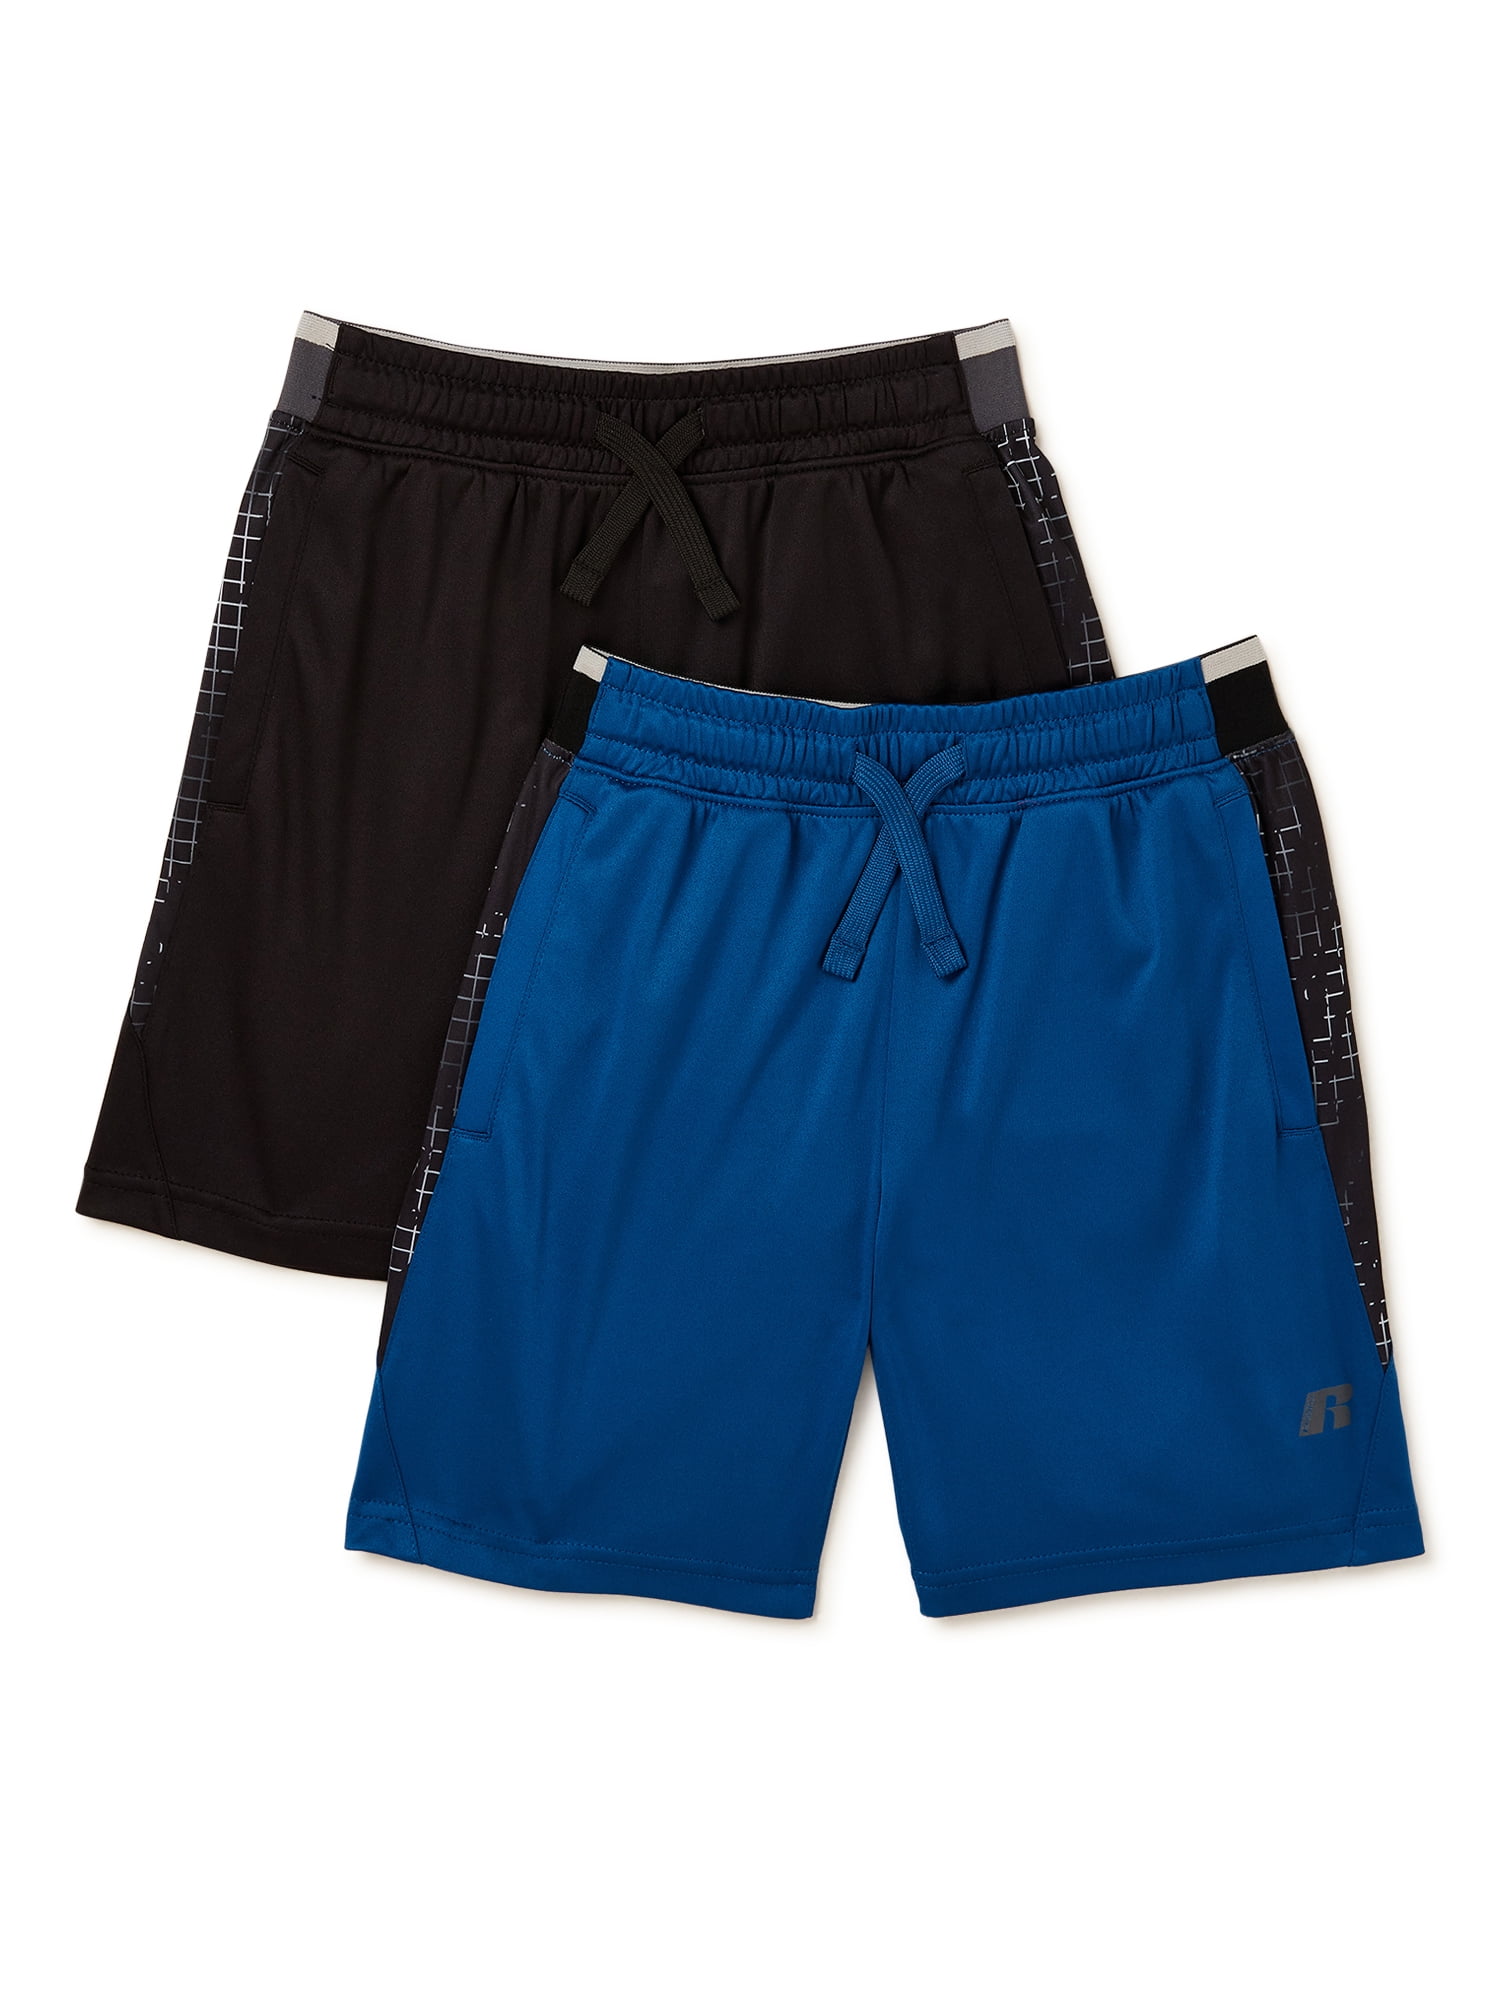 Details about   Boys shorts Russell shorts Clothing Athletic shorts Black yellow scramble 4/5,4T 